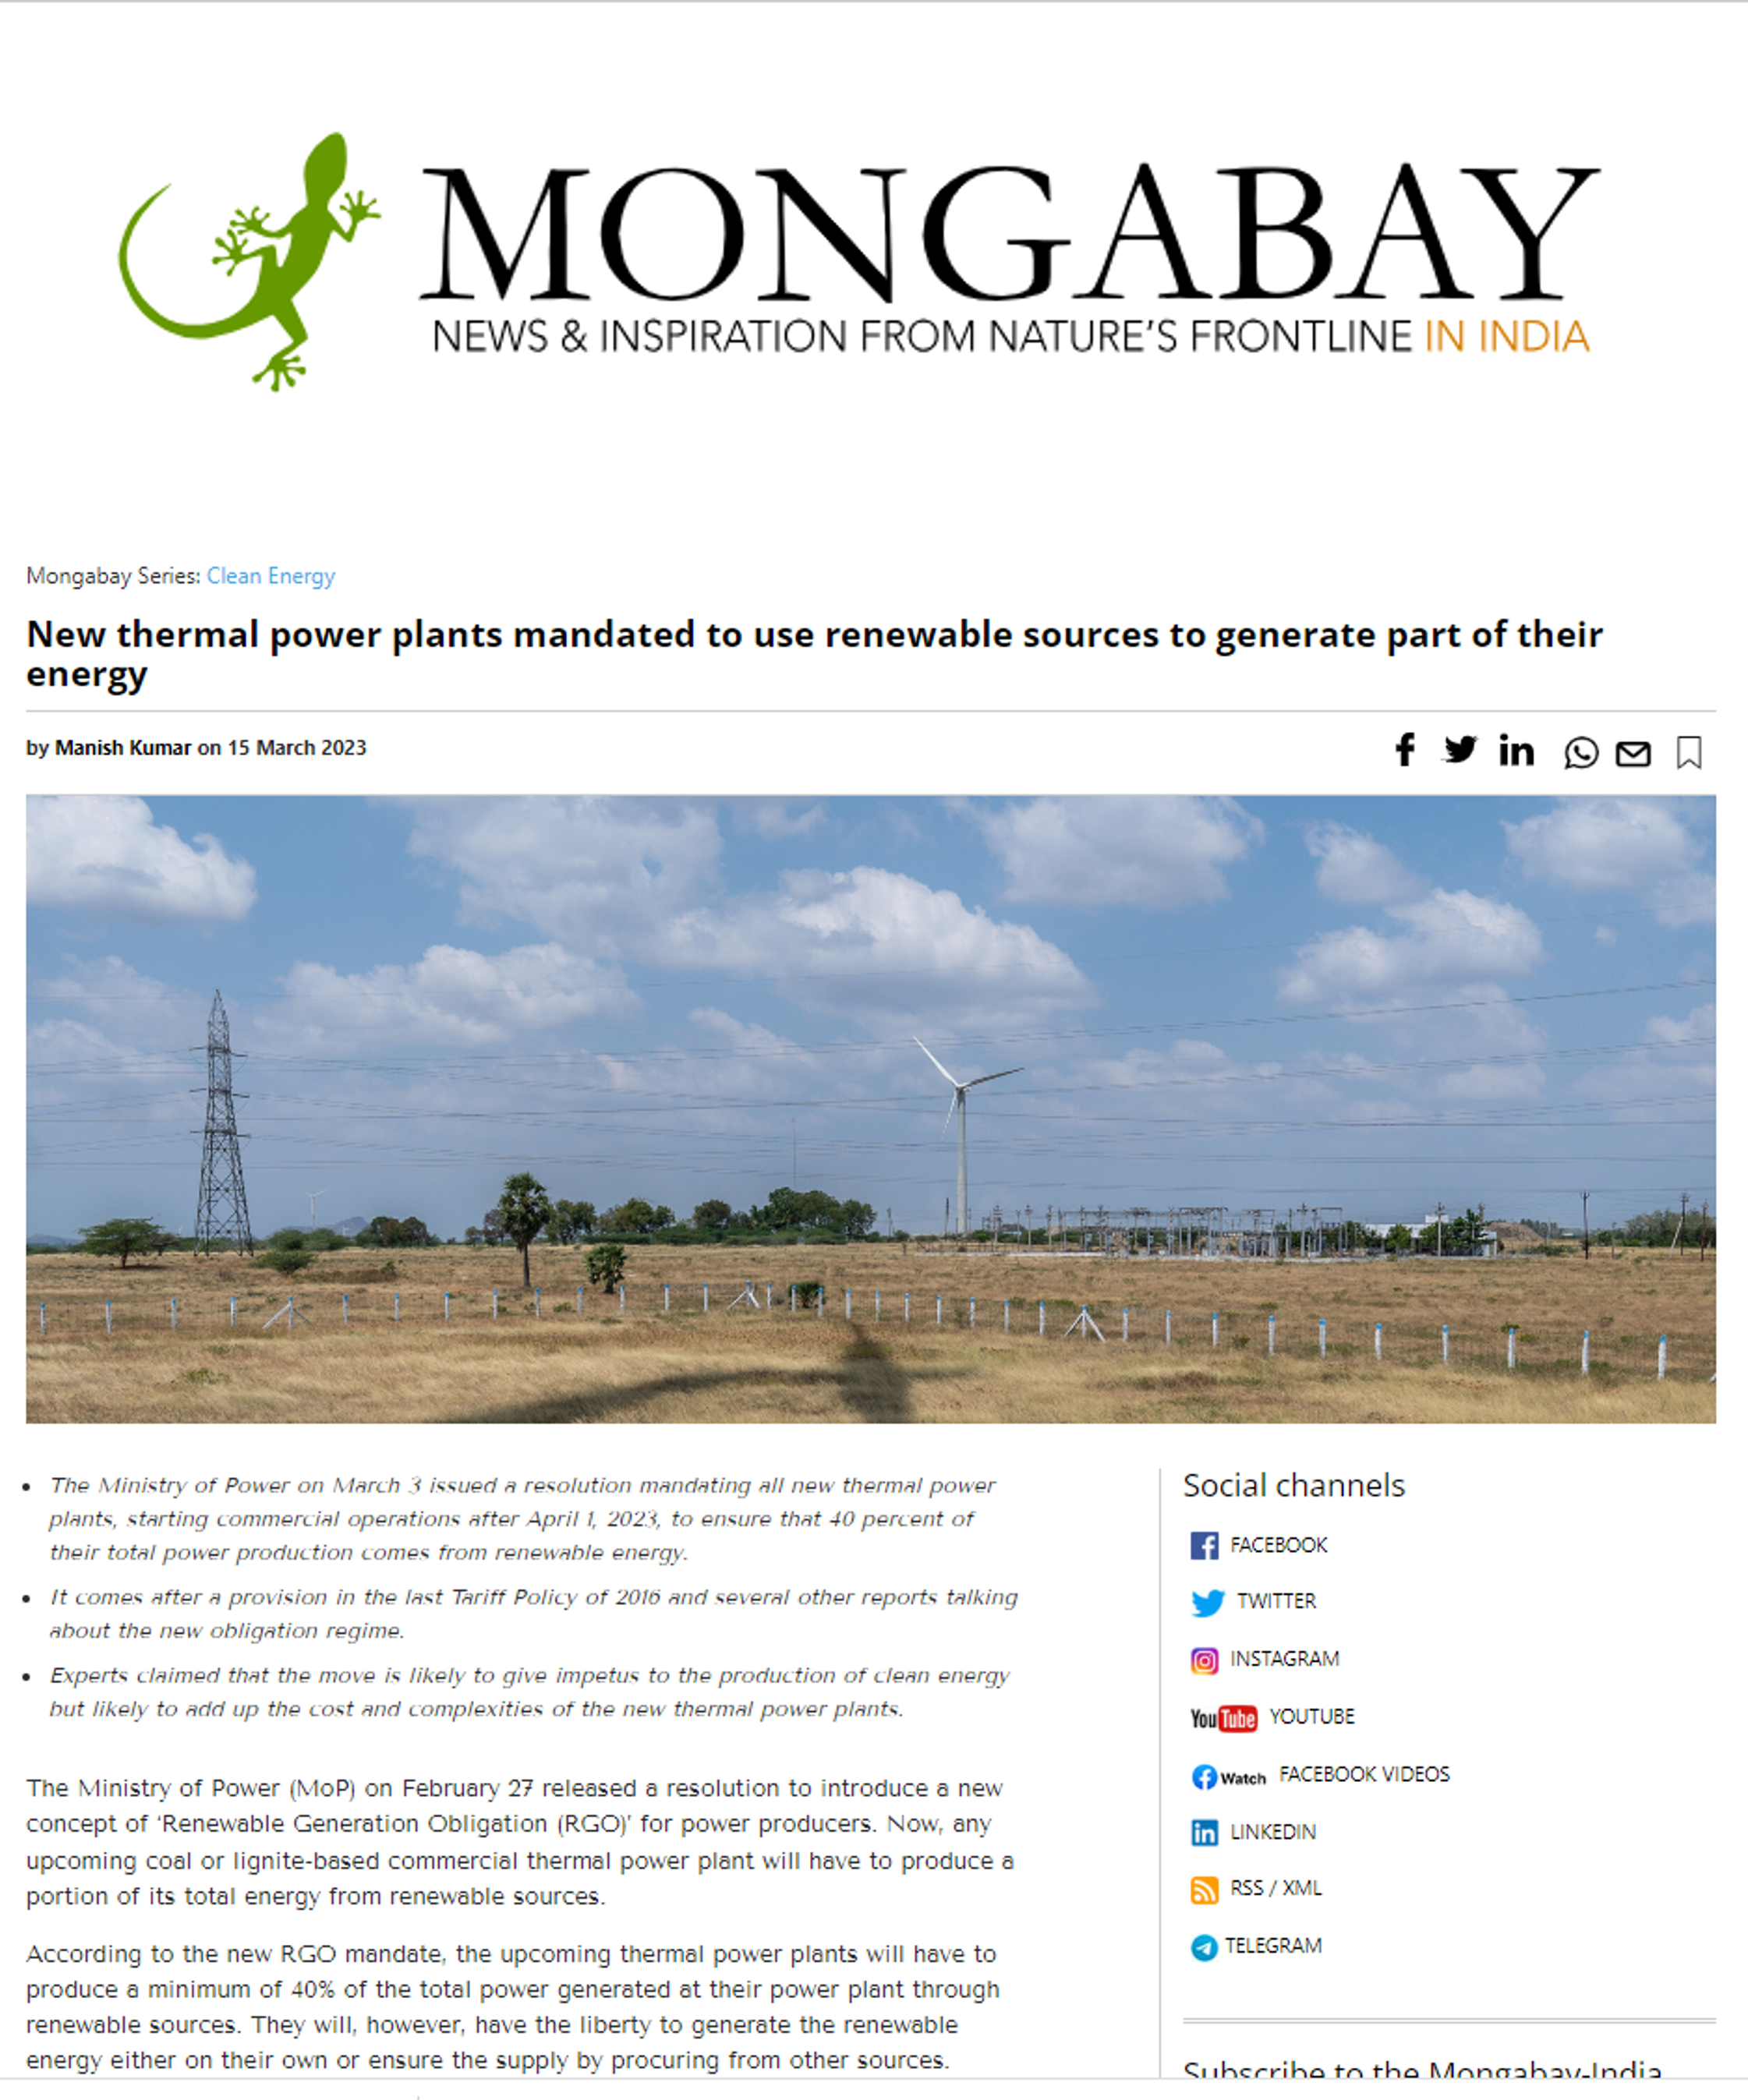 Rishu Garg quoted by Mongabay India on the use of renewable sources by new thermal power plants